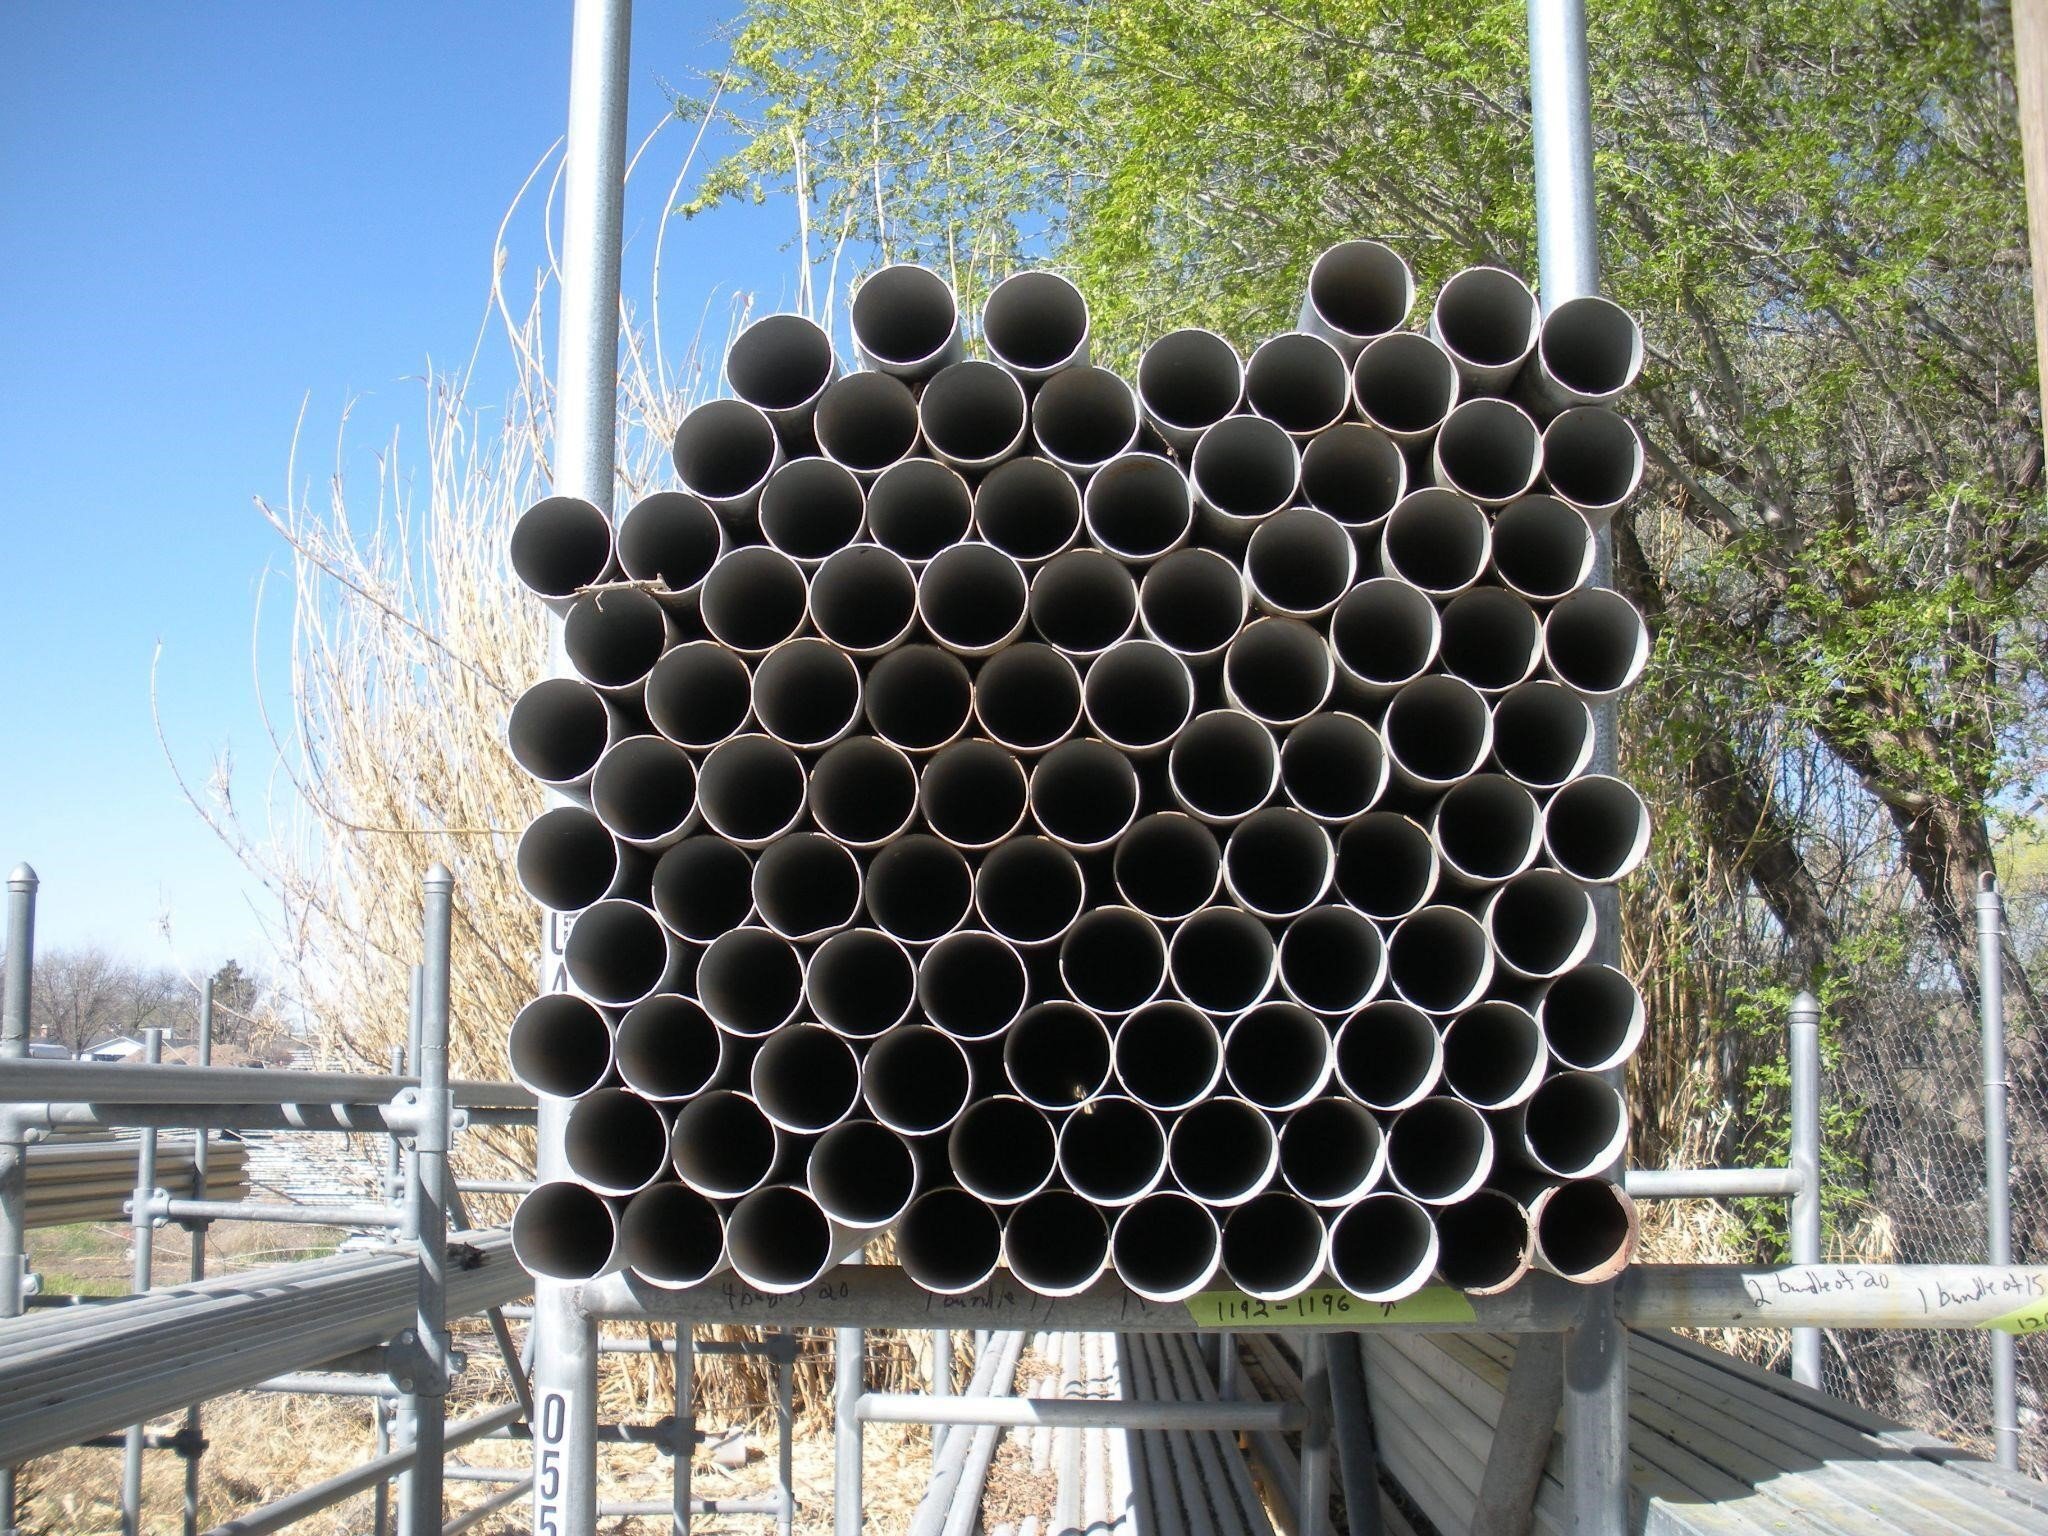 Thunderbird Fencing - Chain Link Supplies - Roswell, NM